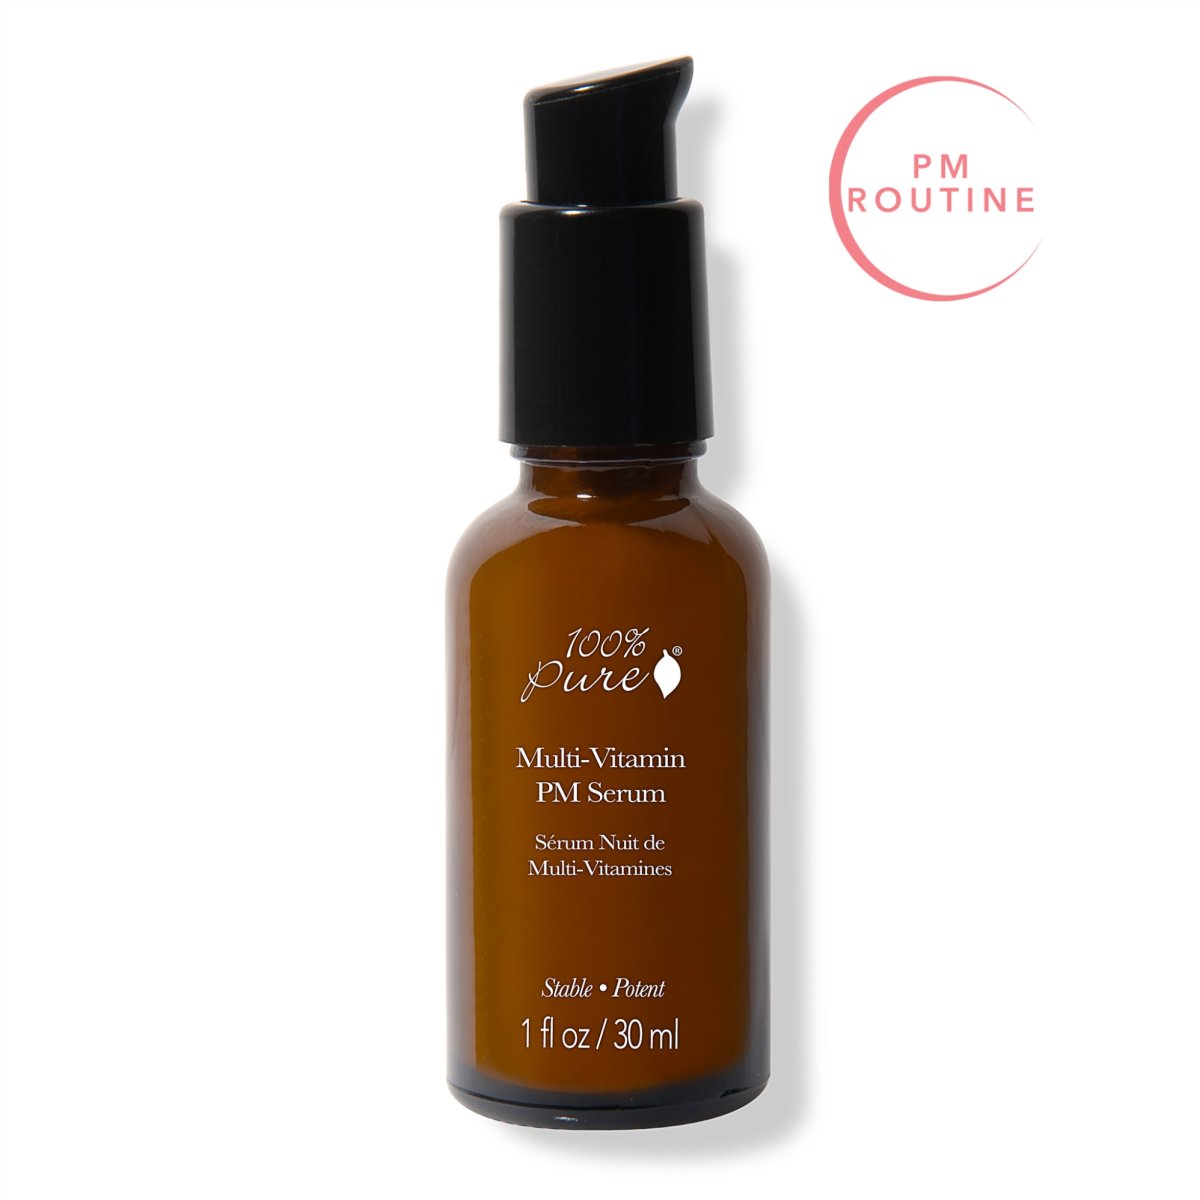 The Best Natural Beauty Serums Word-of-Mouth